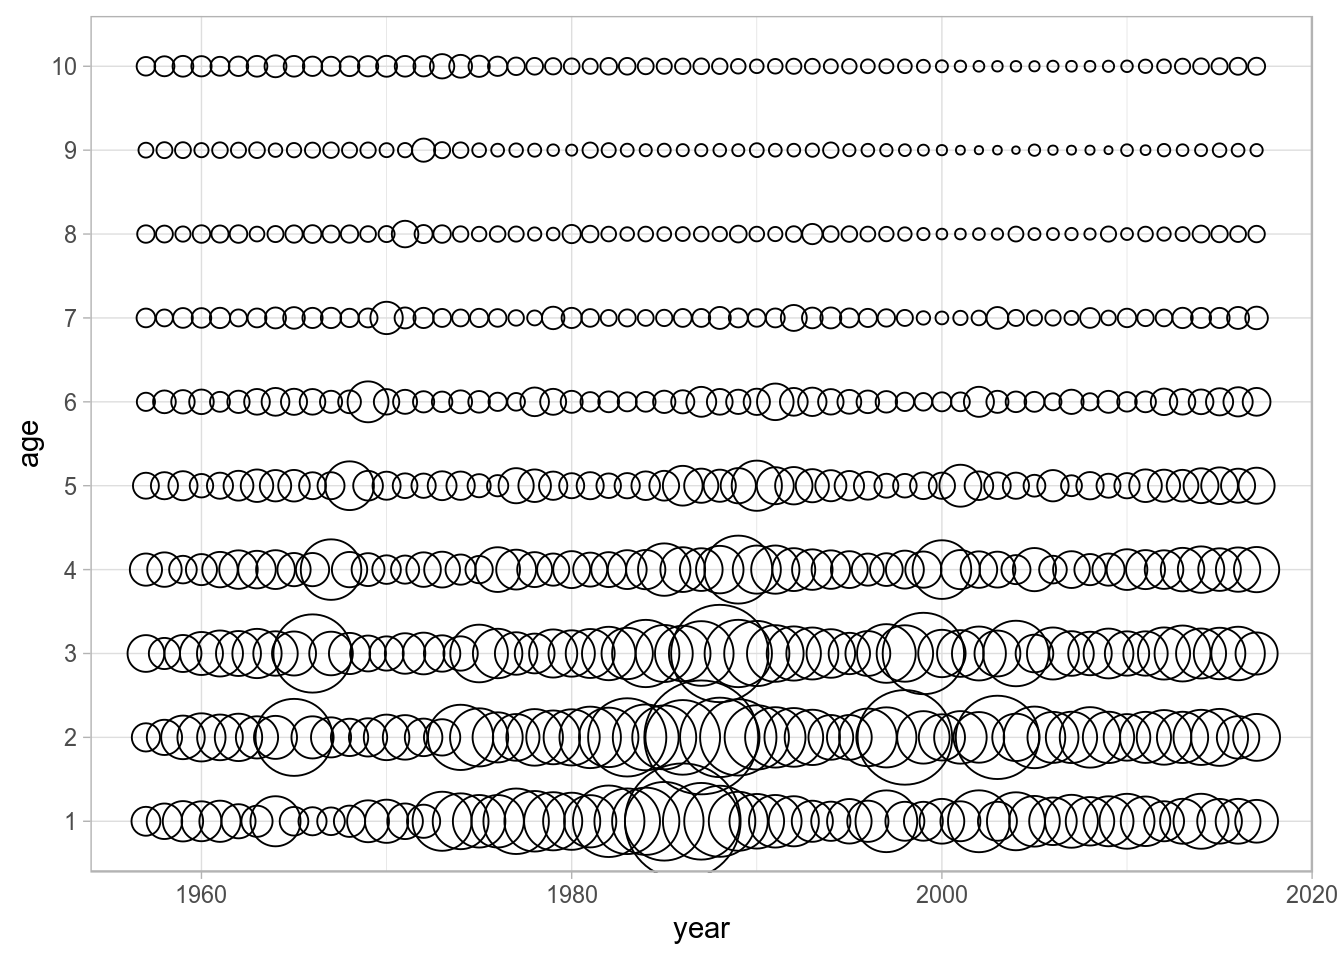 Bubble plot of catch by age in numbners for North Sea plaice.